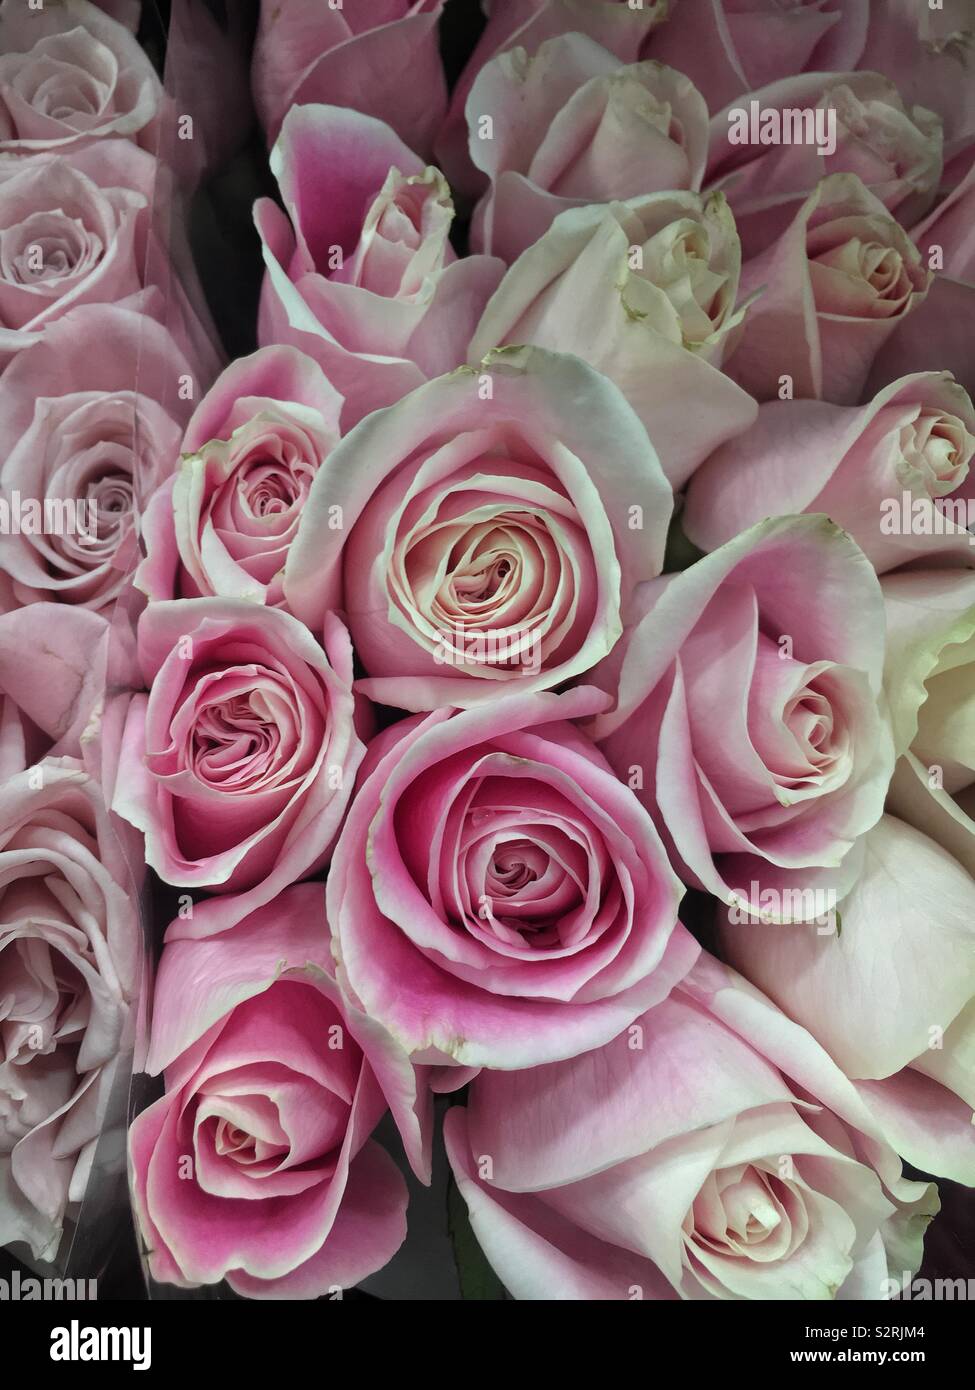 Beautiful bouquet of fresh pink roses with white accents in full bloom. Stock Photo